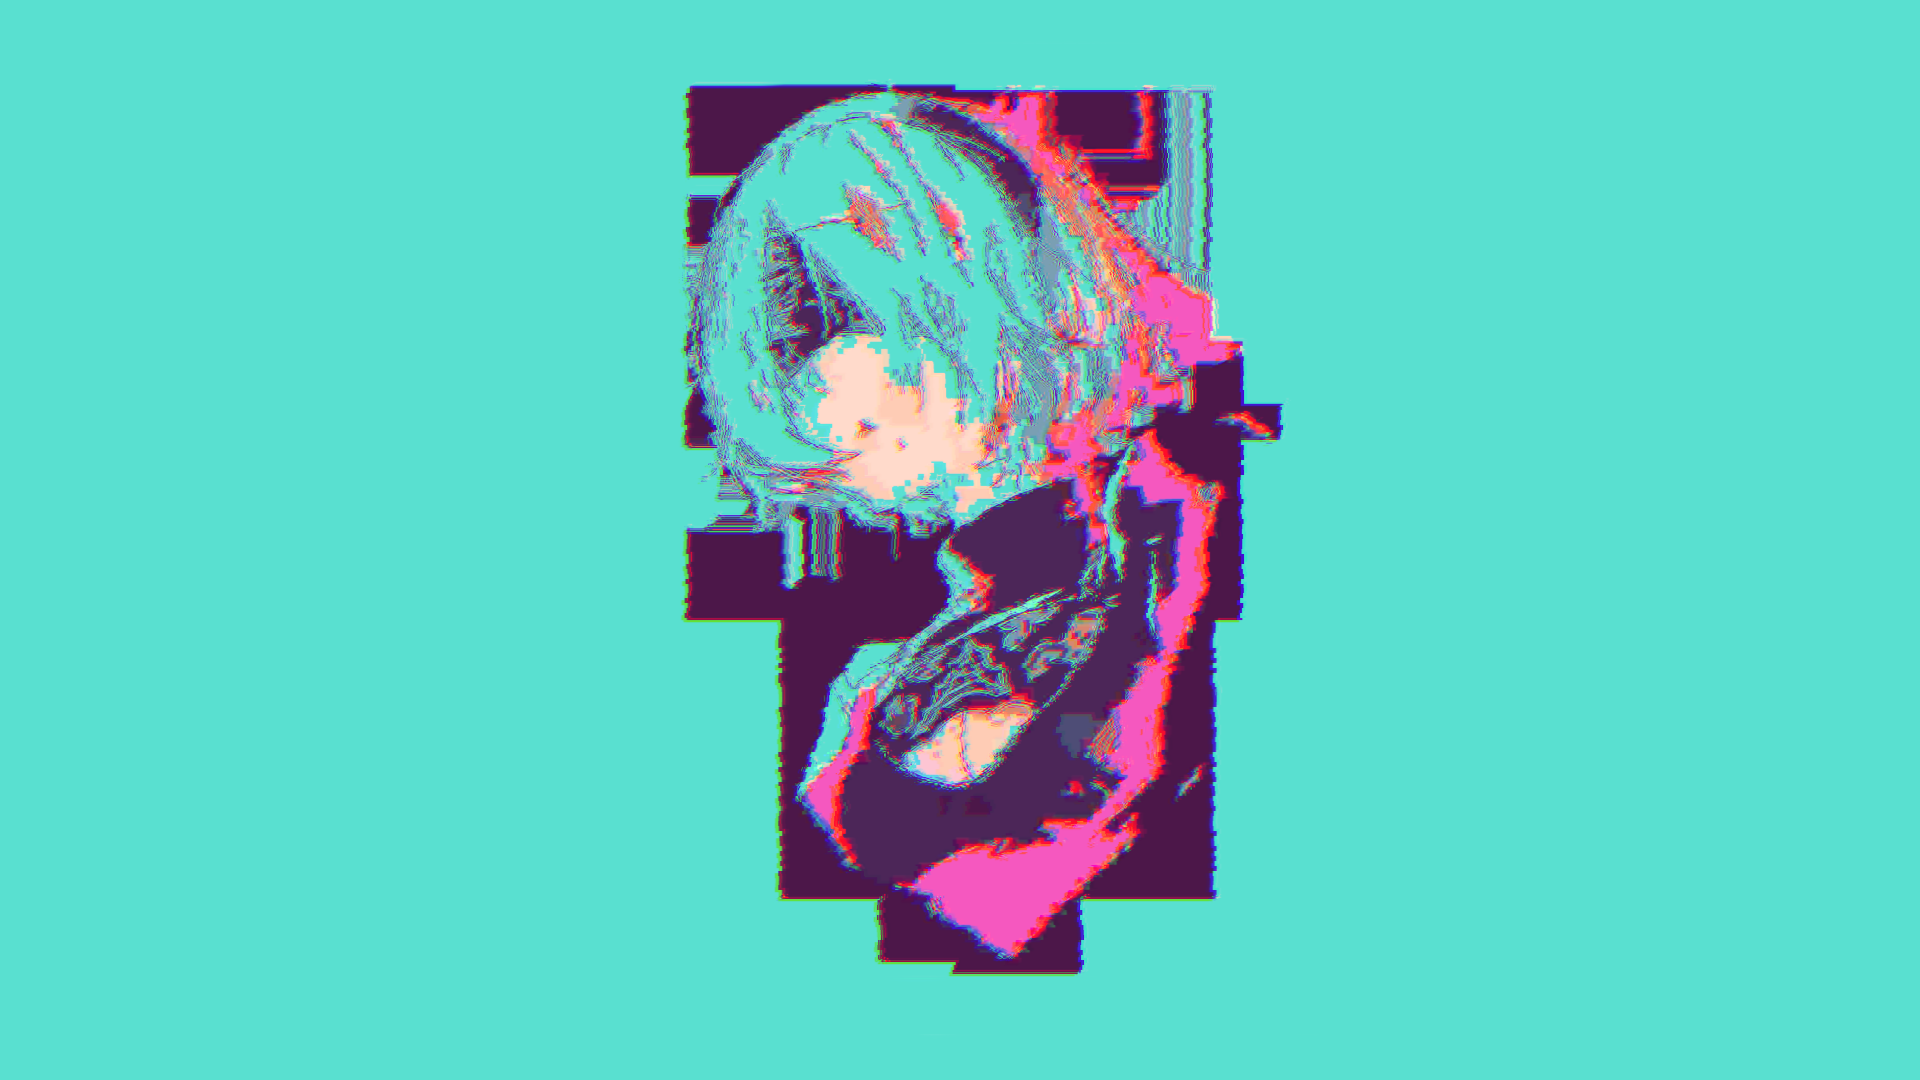 green haired female anime character illustration, vaporwave, 2B (Nier: Automata), Nier: Automata, simple background